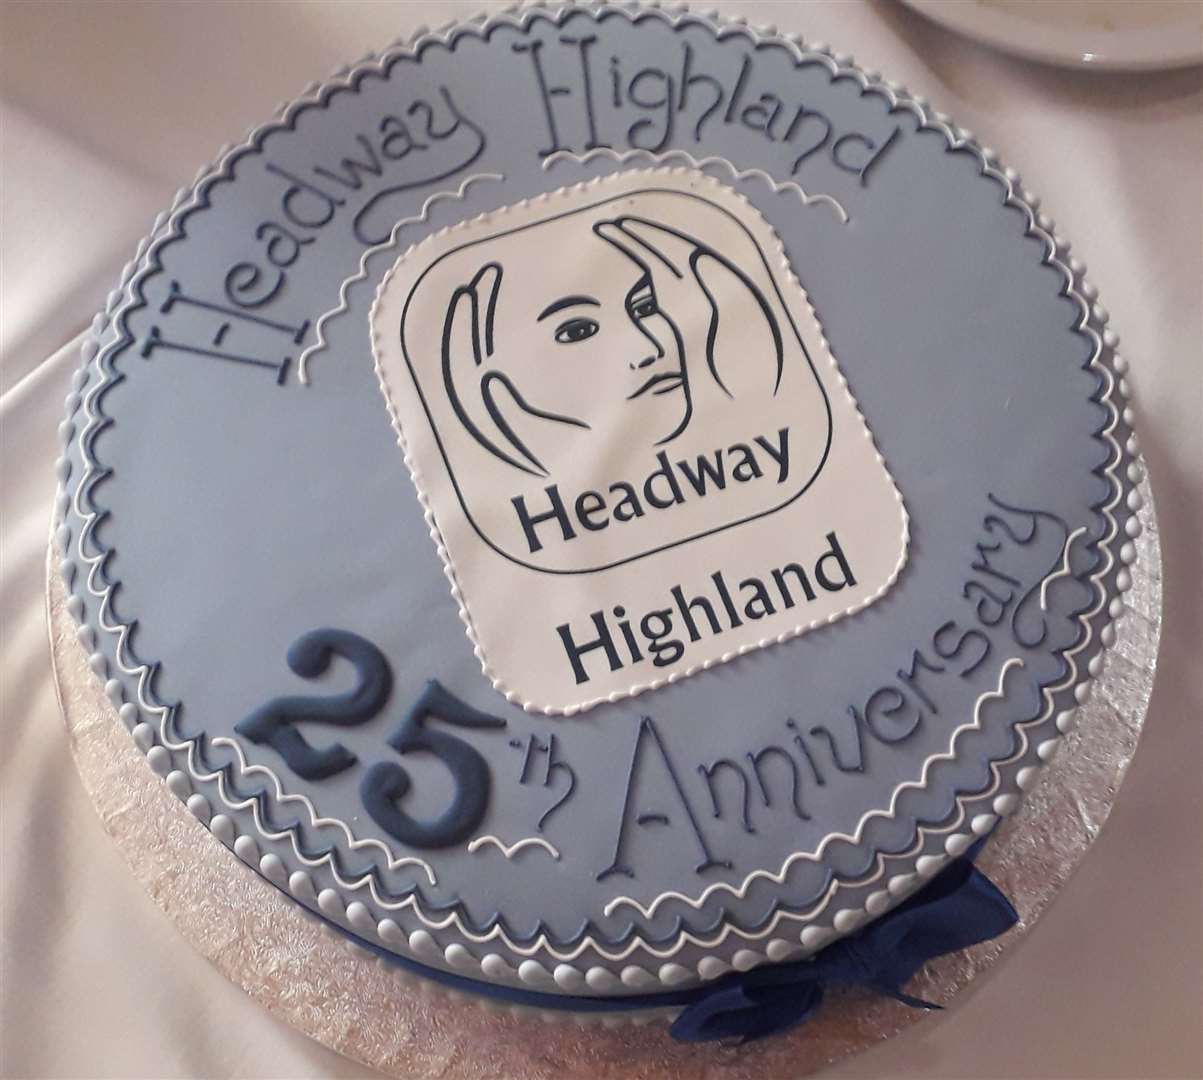 Headway Highland is a charity that supports those who have suffered with an injury to the brain. The charity celebrates its 25th anniversary this year